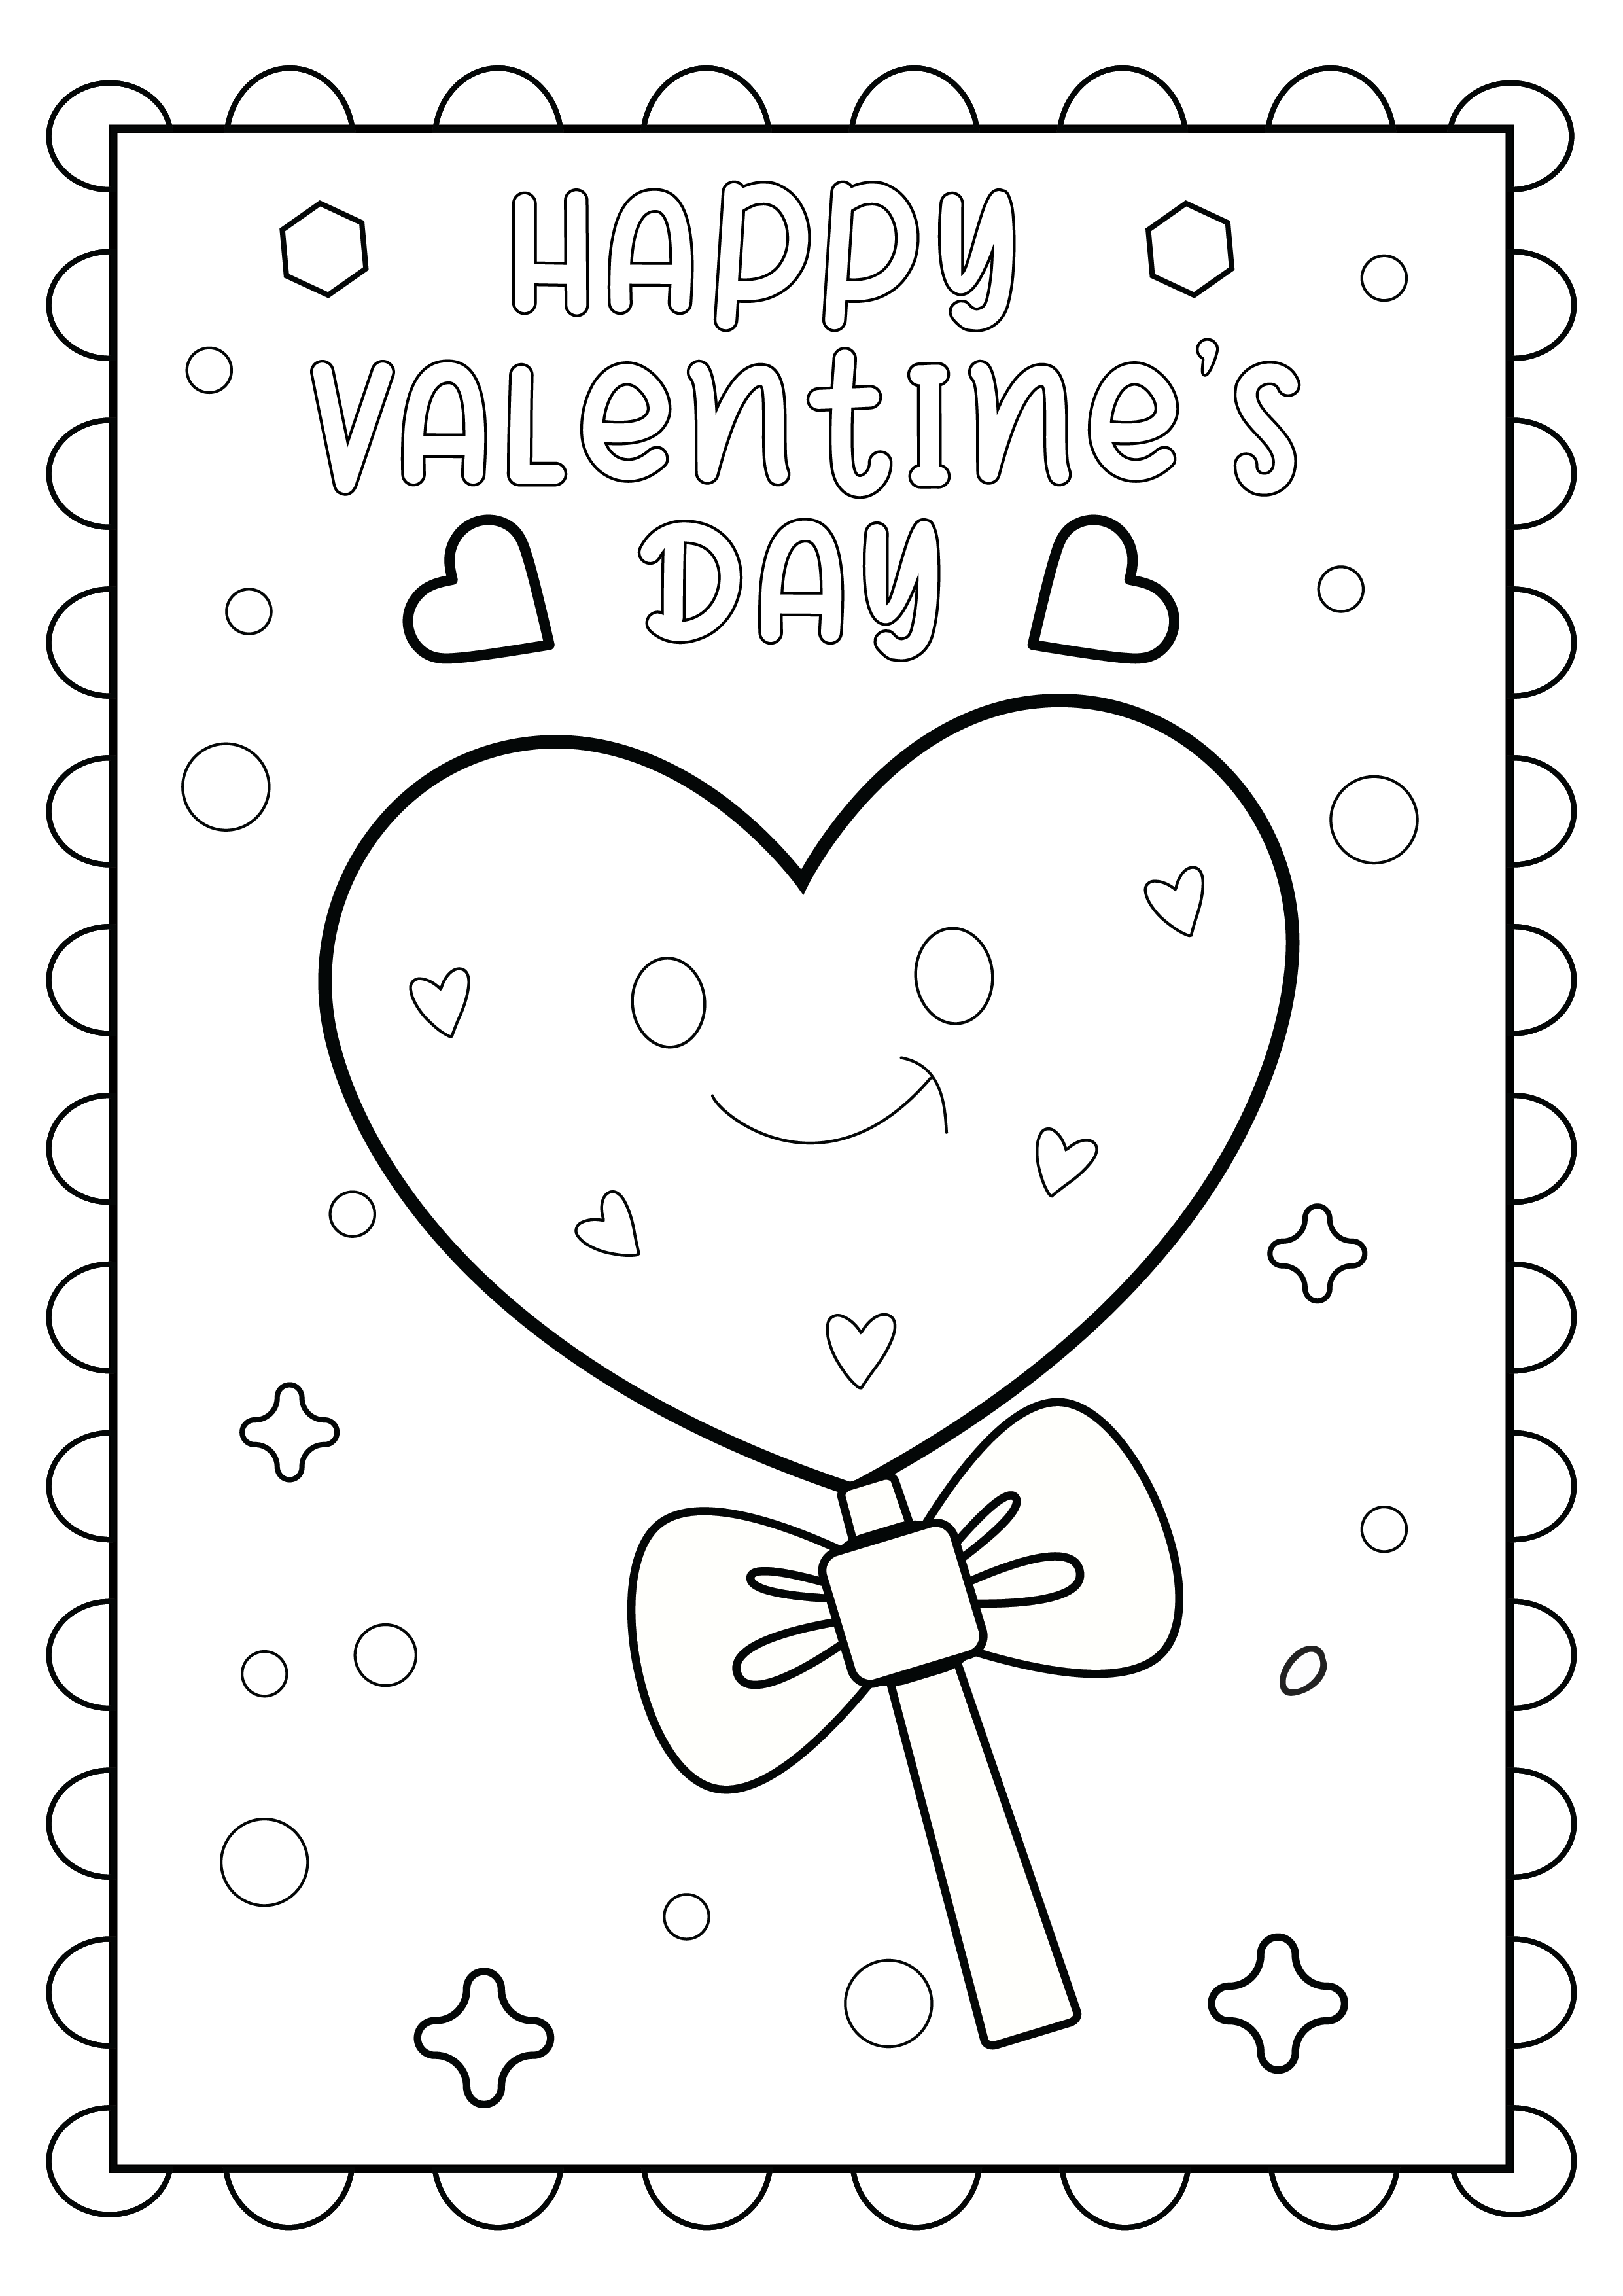 Bring love to life valentines day coloring pages for kids made by teachers